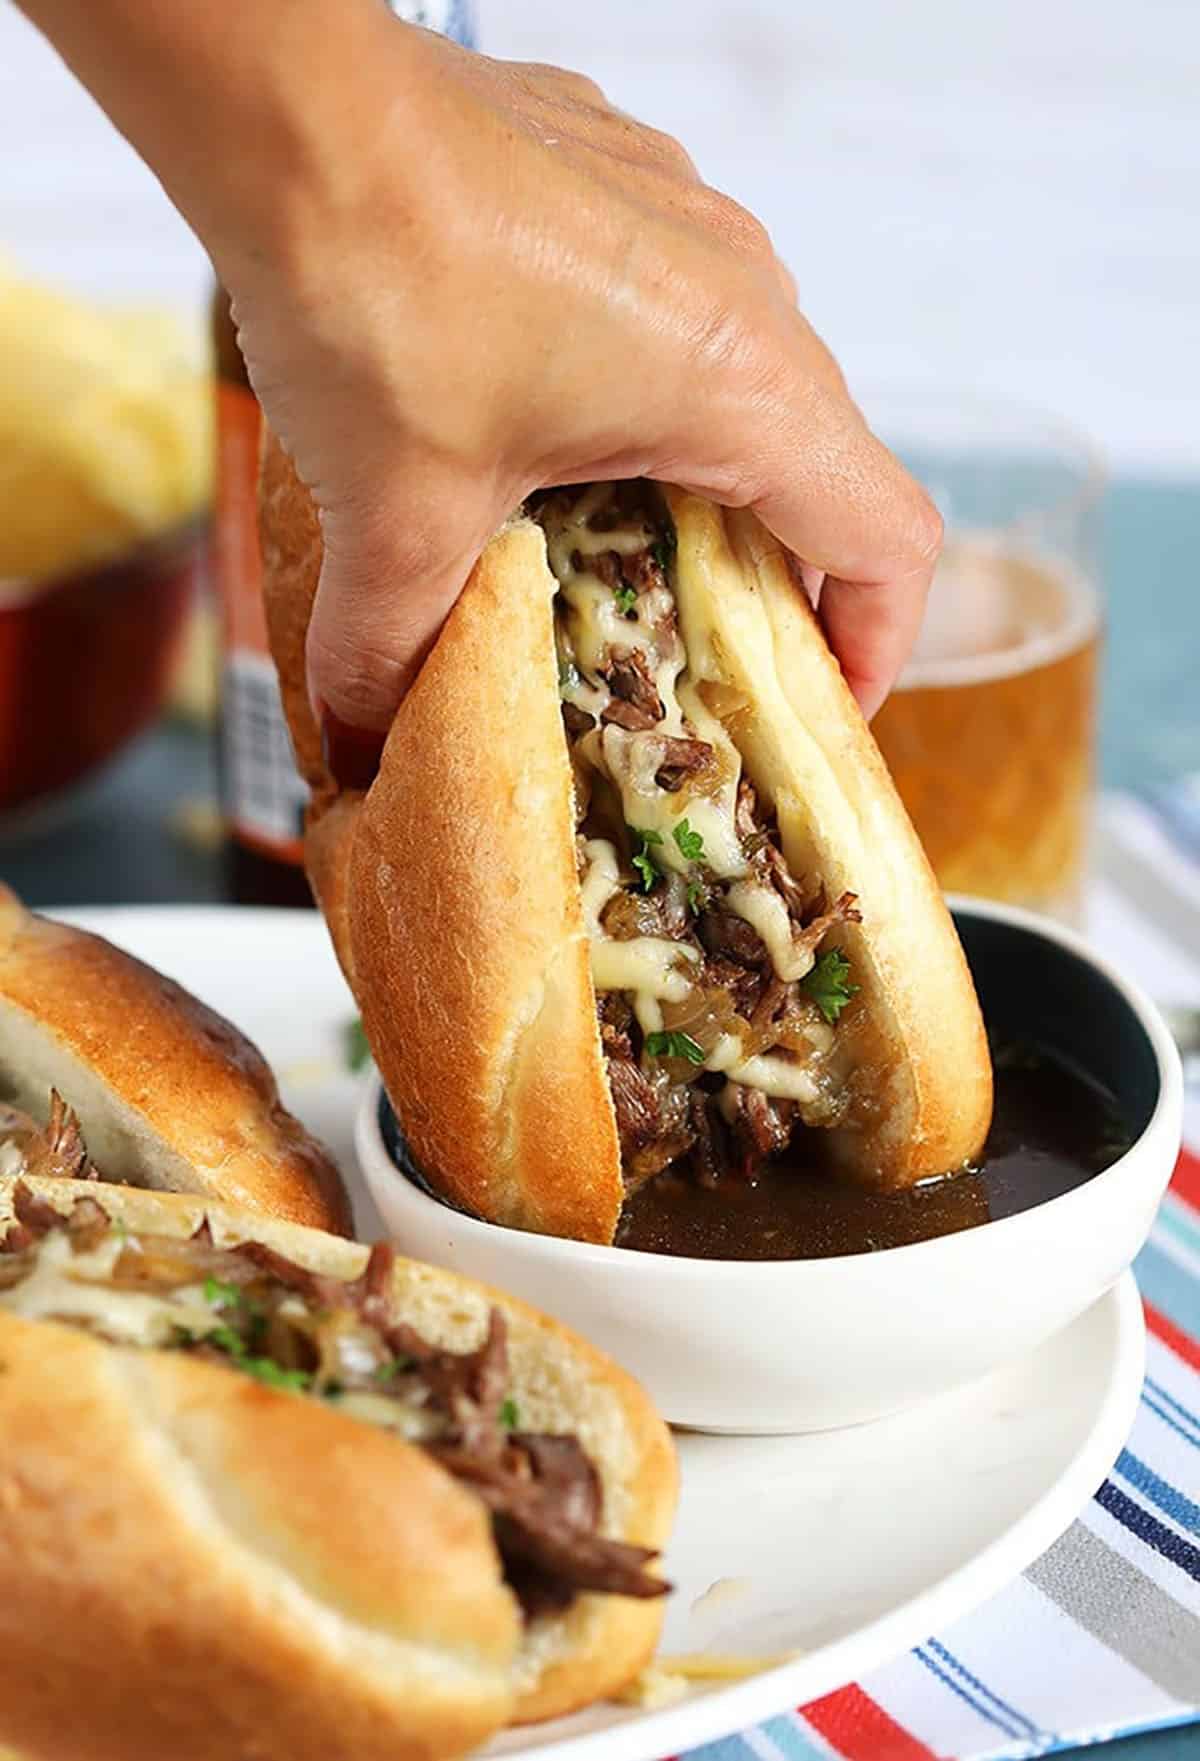 French Dip Sandwich dunked in a bowl of au jus sauce.